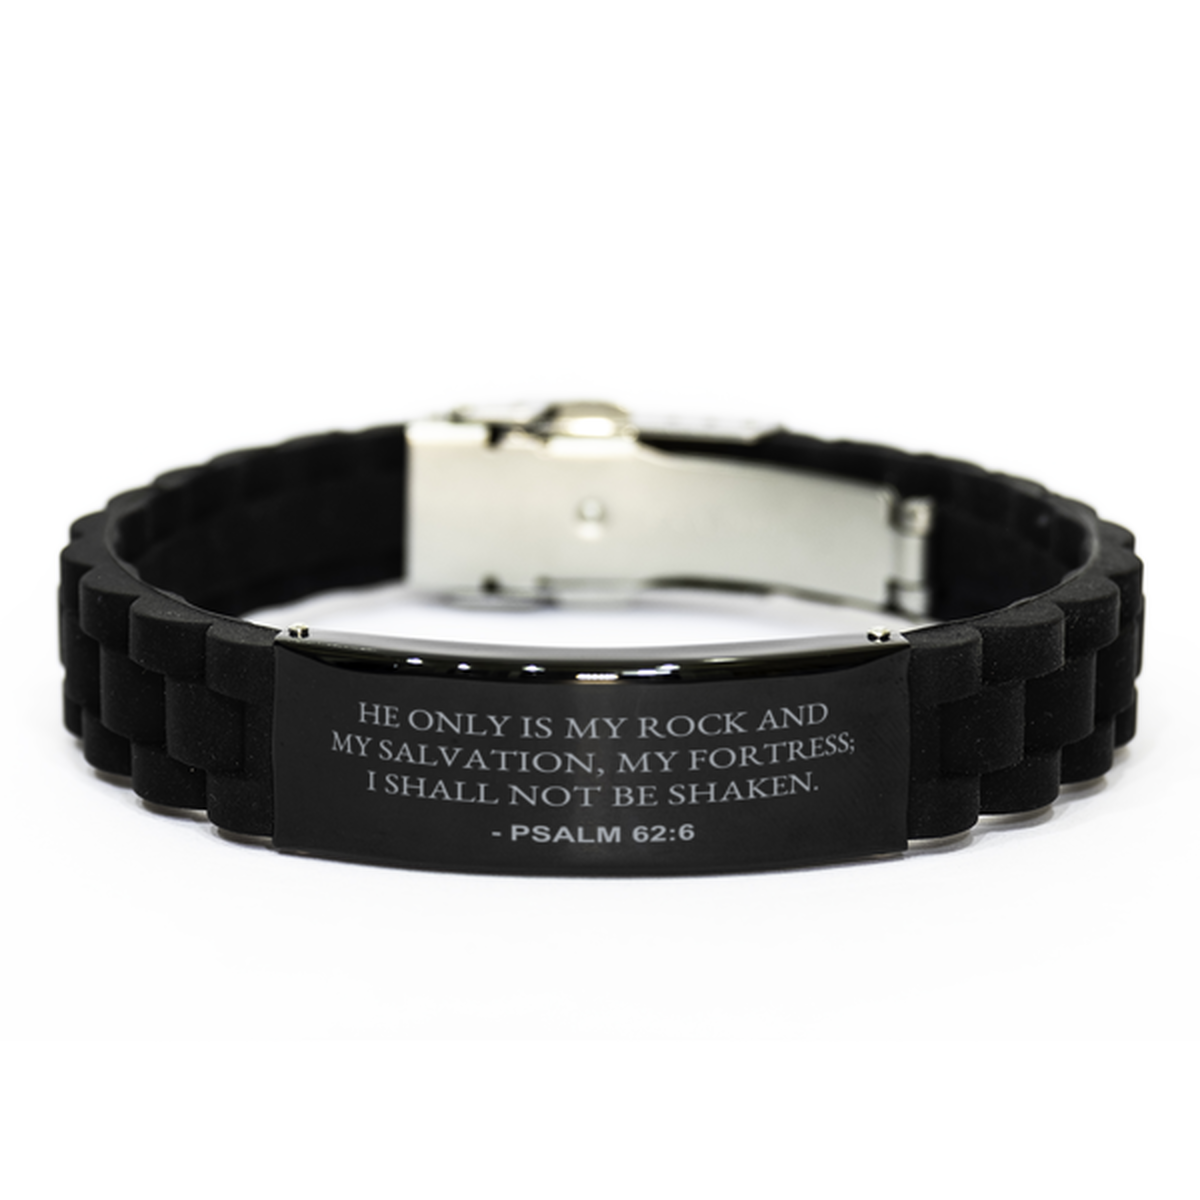 Bible Verse Black Bracelet,, Psalm 62:6 He Only Is My Rock And My Salvation, My Fortress;, Inspirational Christian Gifts For Men Women